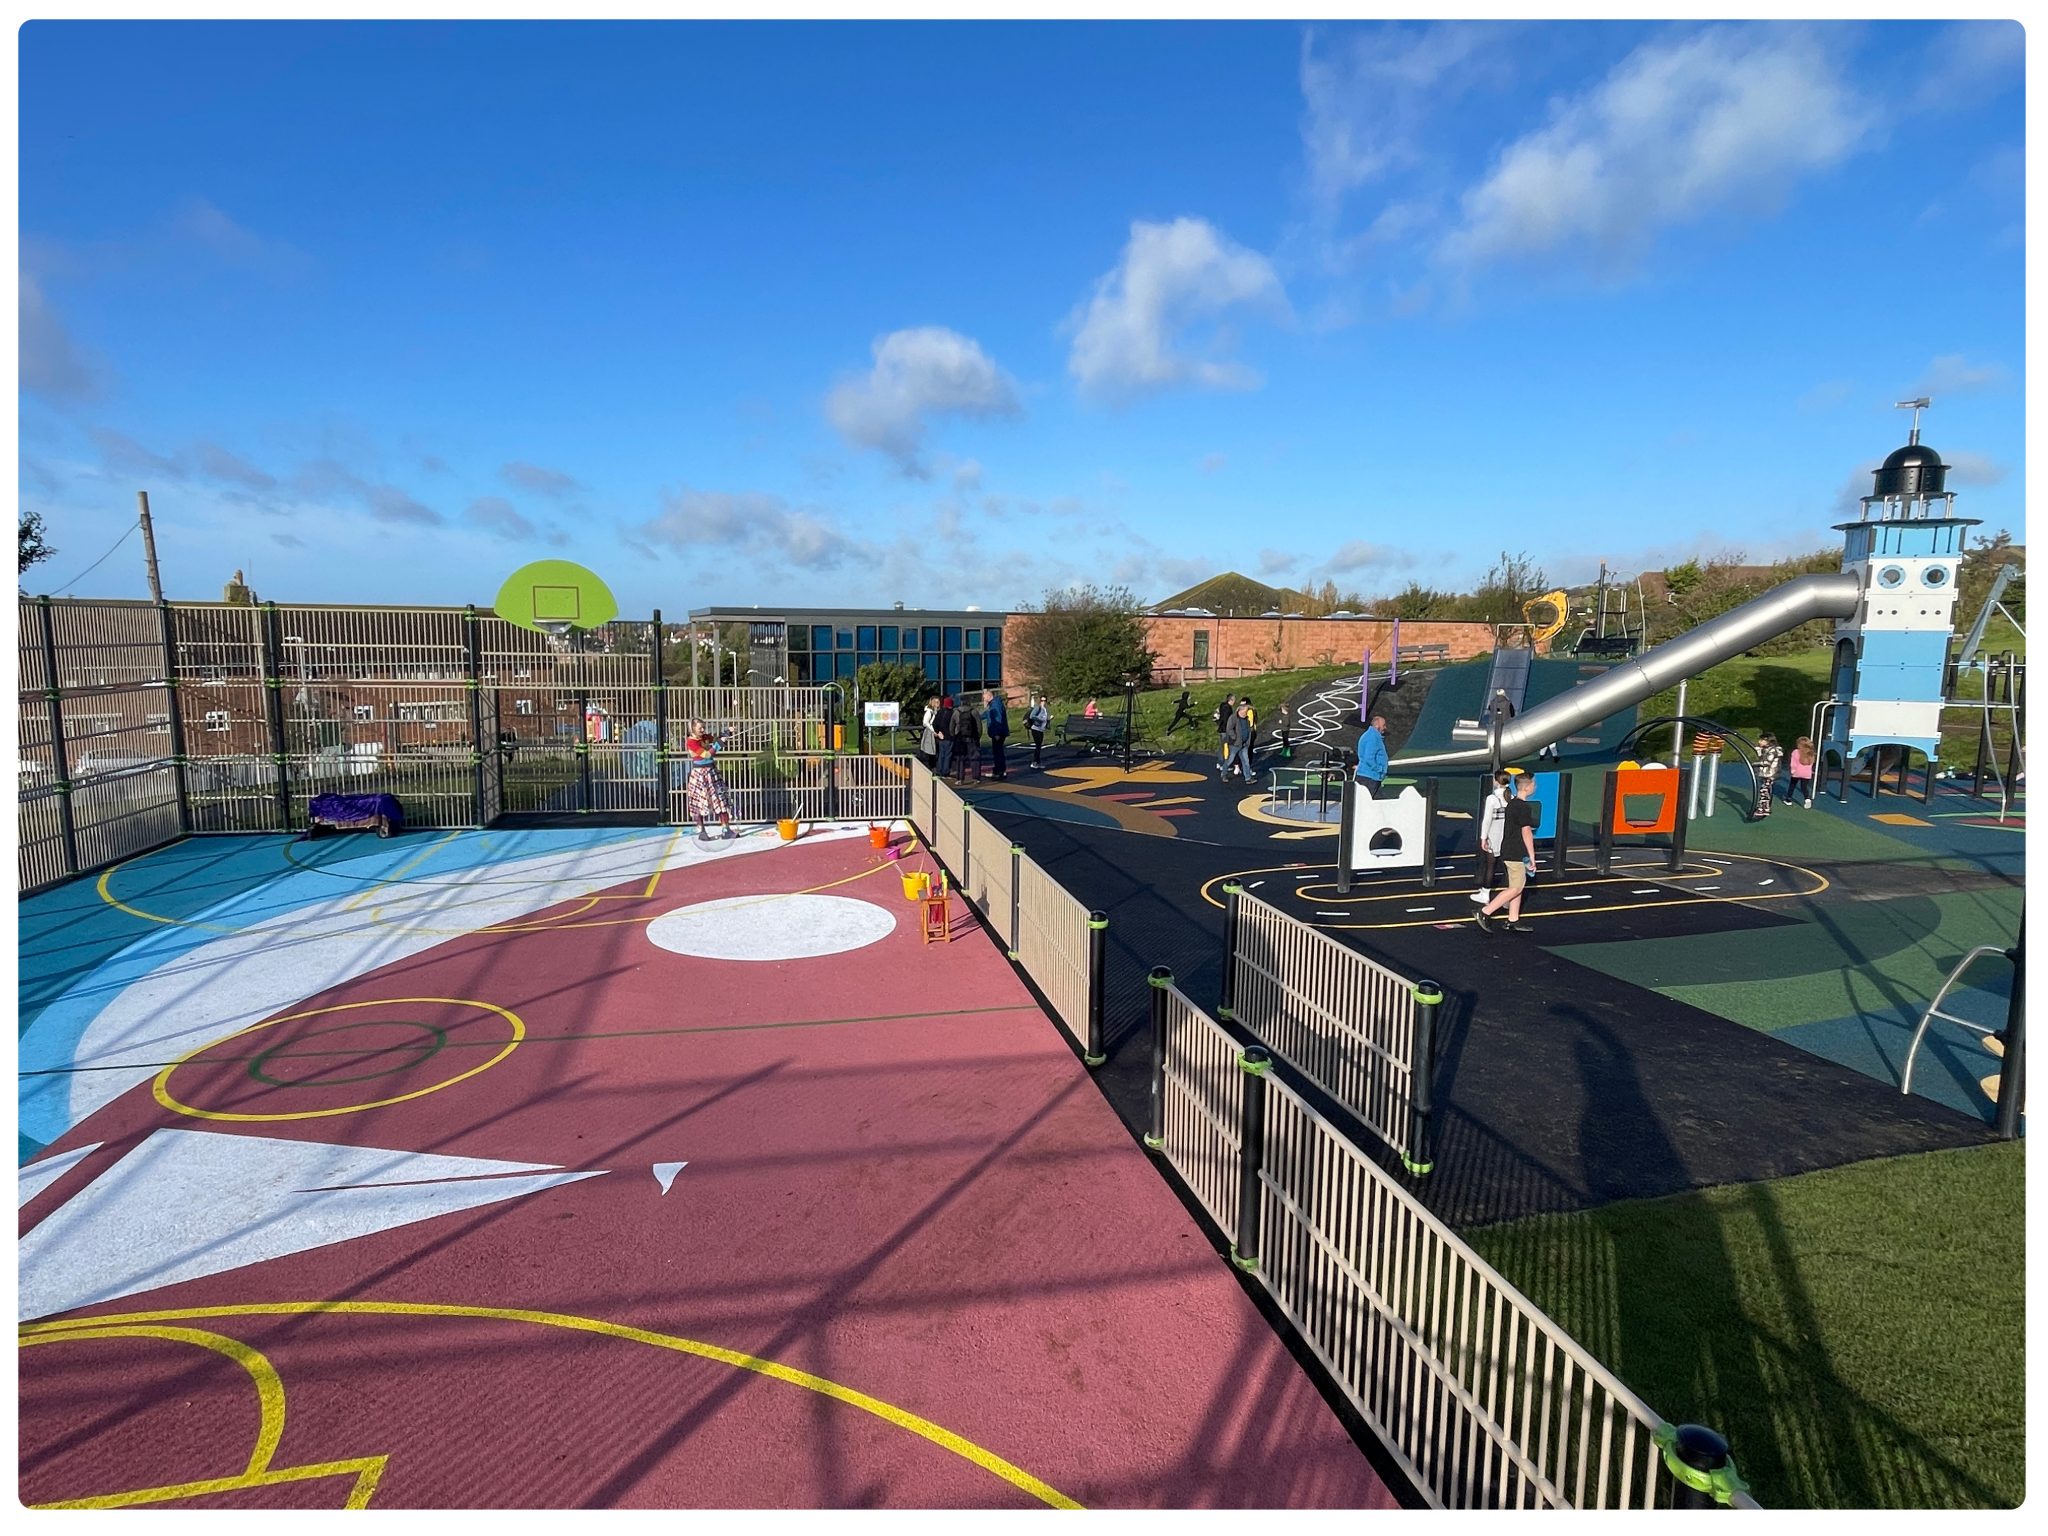 Brighton & Hove City Council unveils stunning substantial playground equipment refurbishment celebrating Sea, City and South Downs